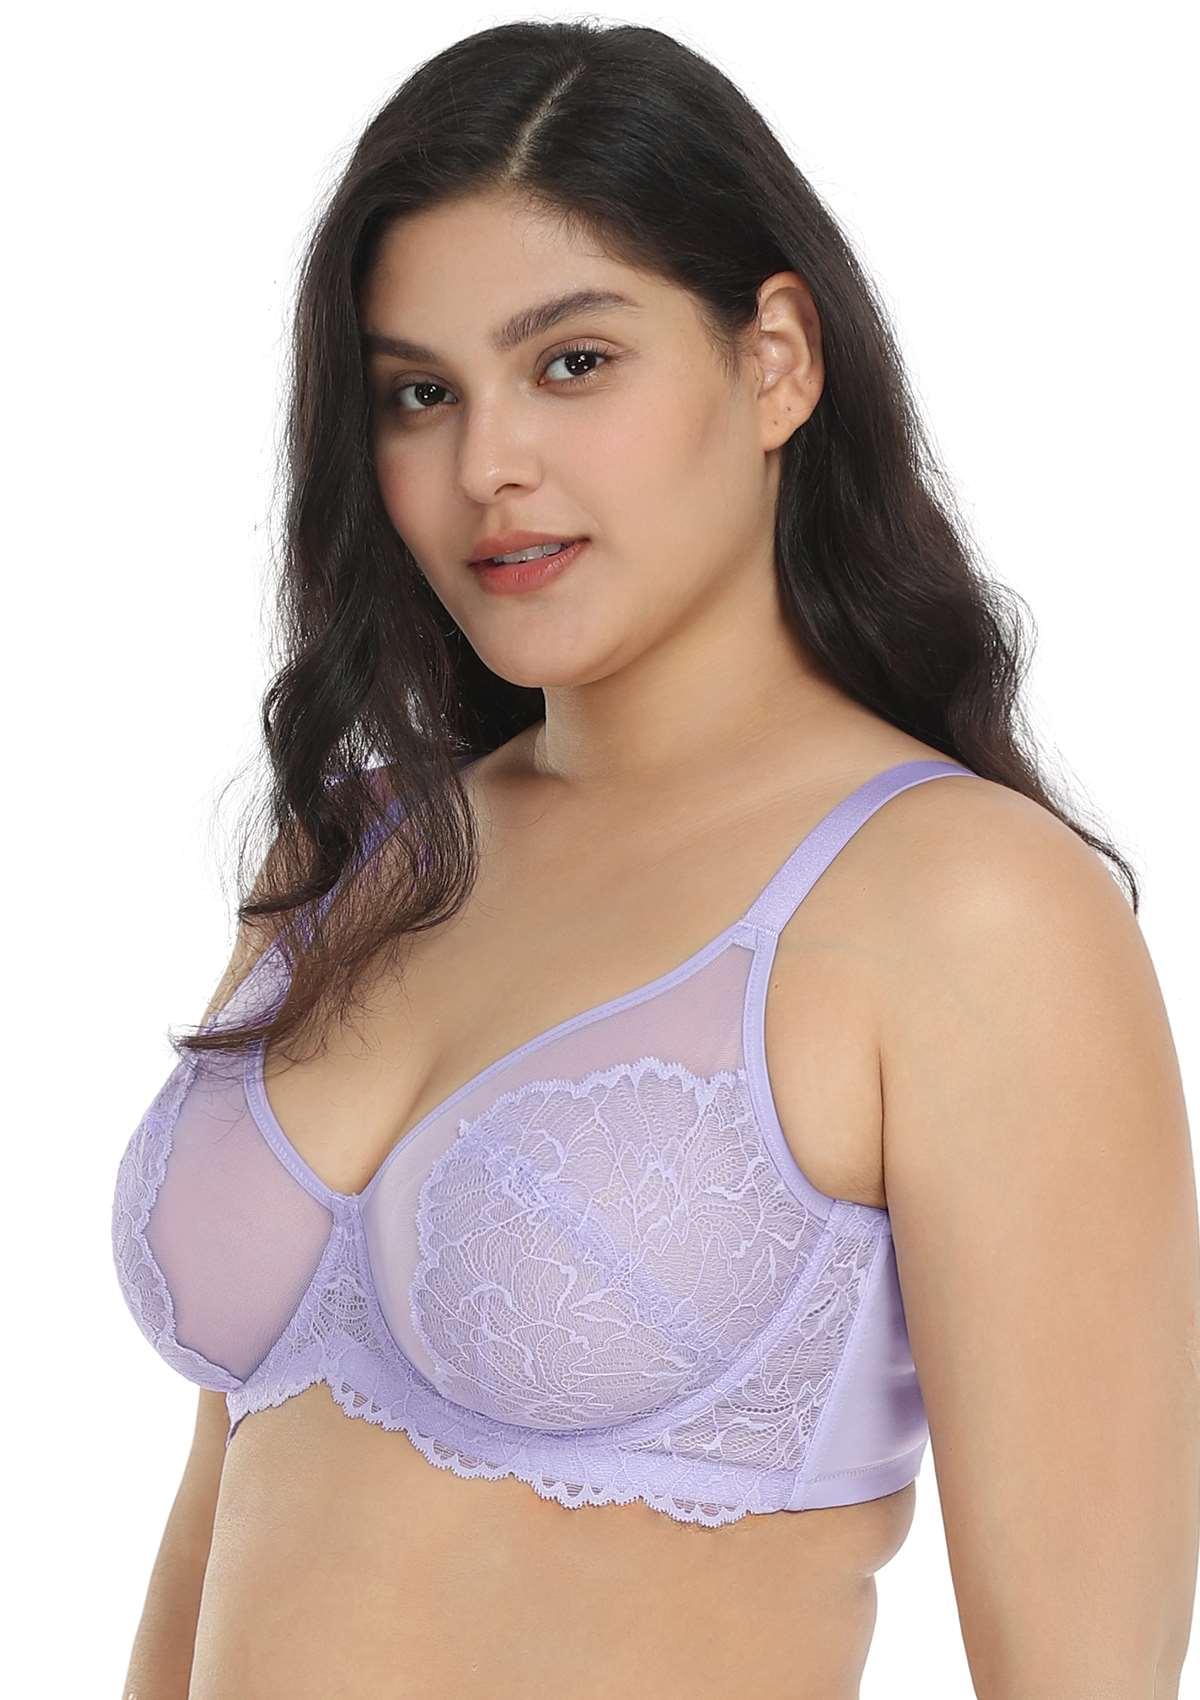 HSIA Blossom Transparent Lace Bra: Plus Size Wired Back Smoothing Bra - Light Purple / 46 / DD/E